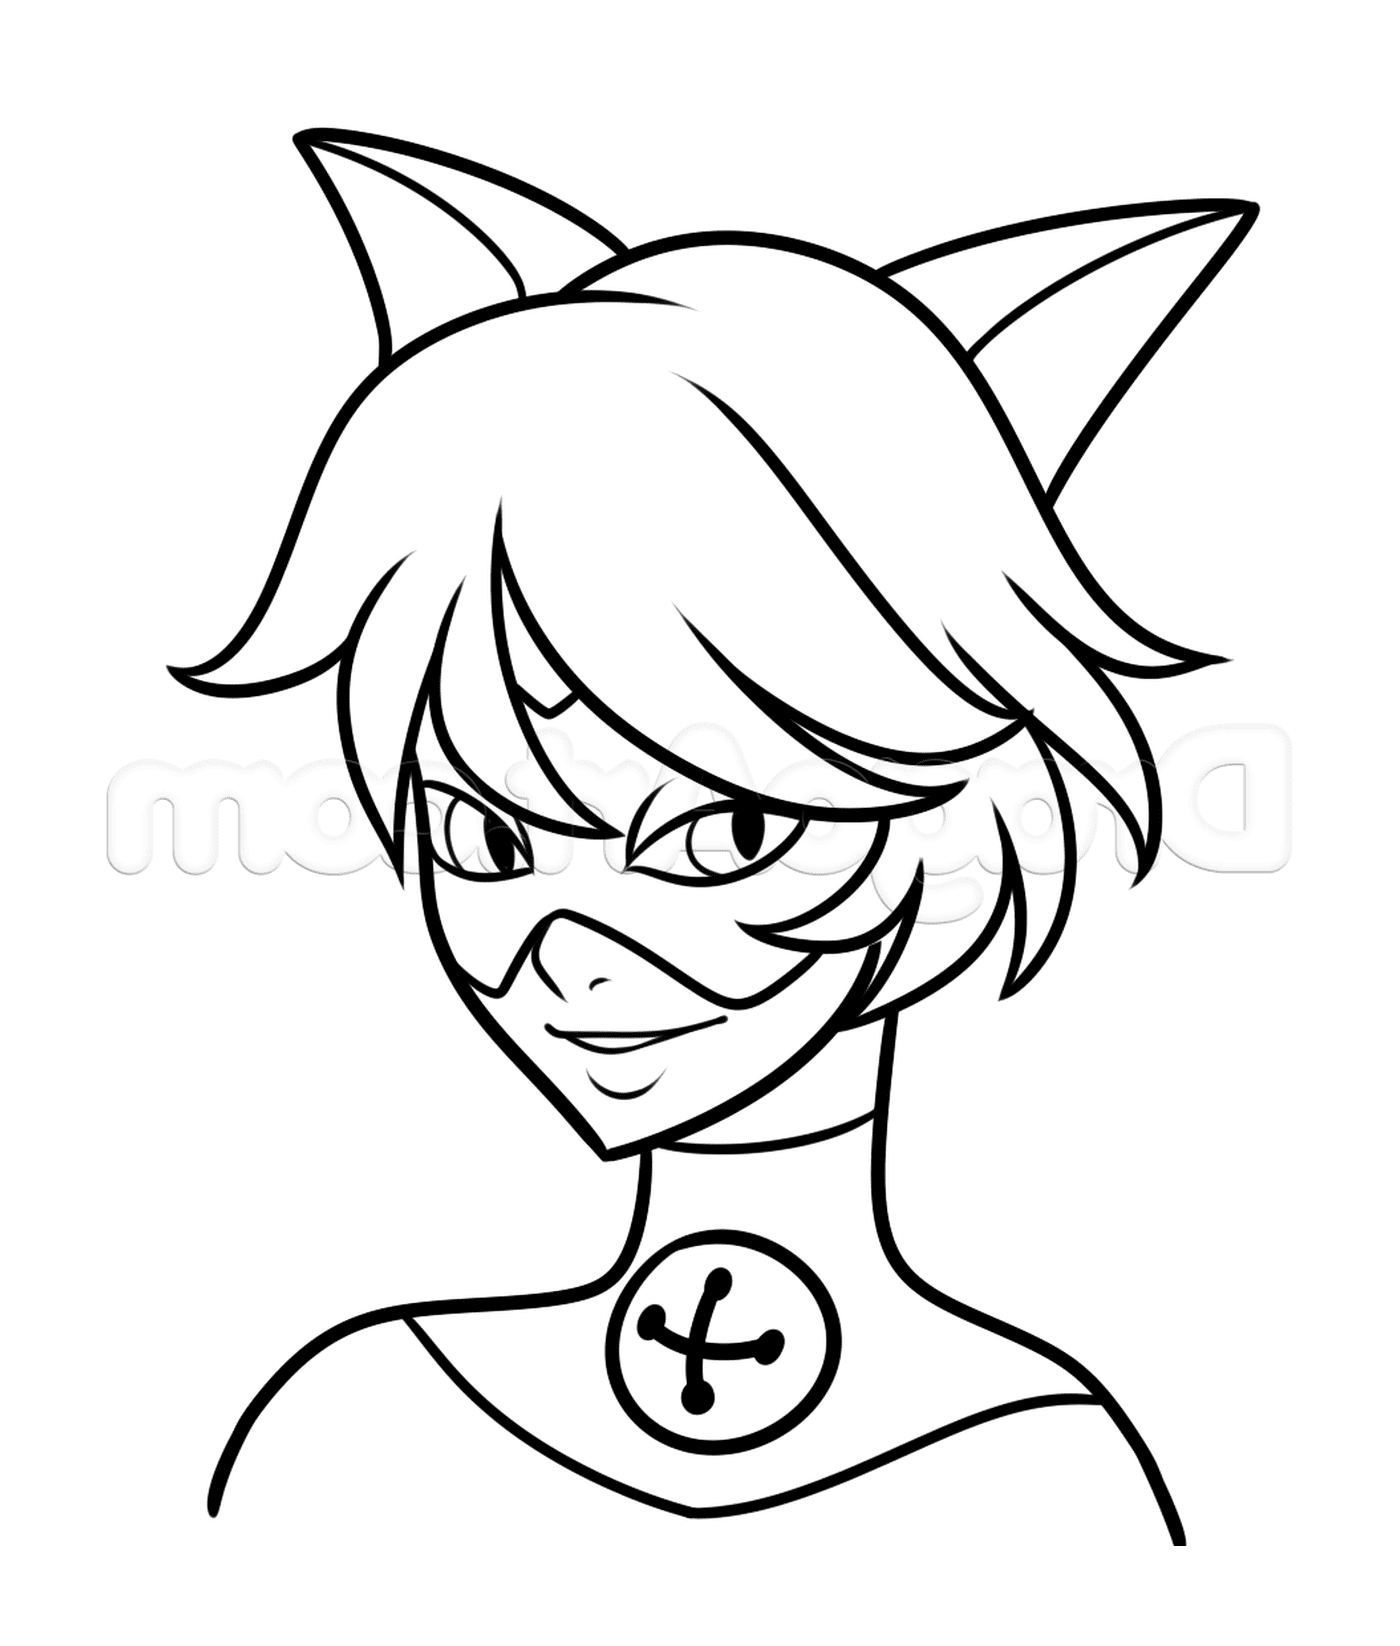  Black cat from Miraculous Ladybug cute to color 